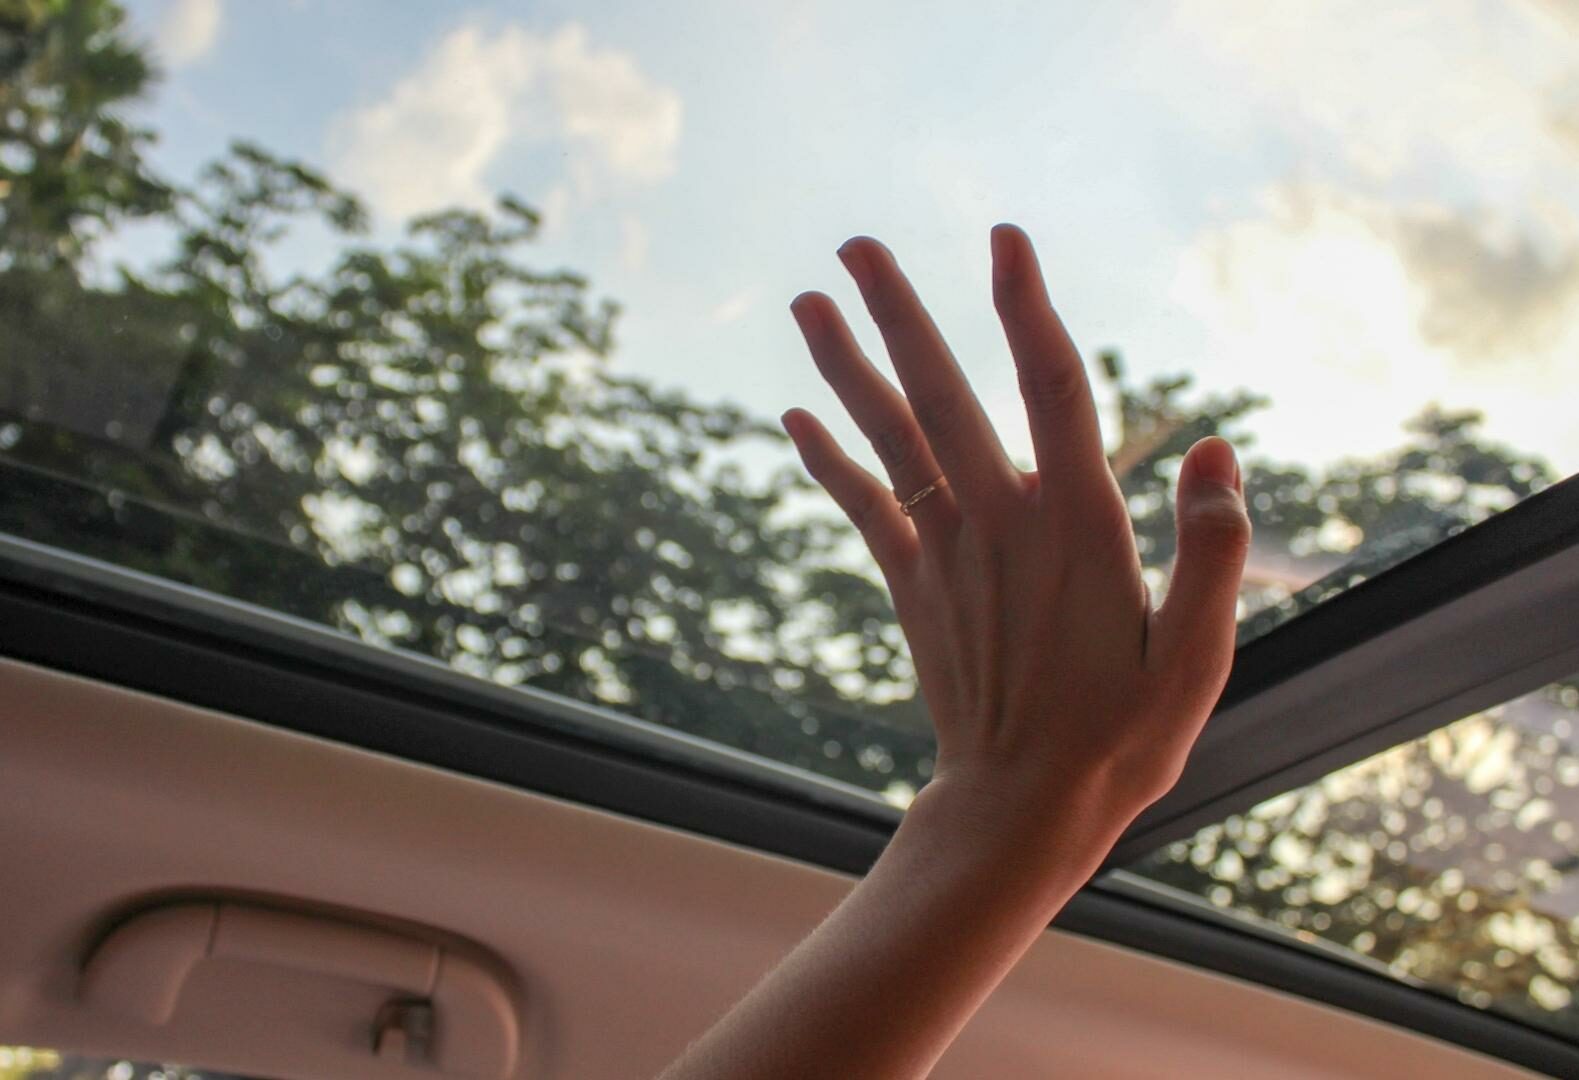 Hand tries to reach cars glass roof, view from inside the car